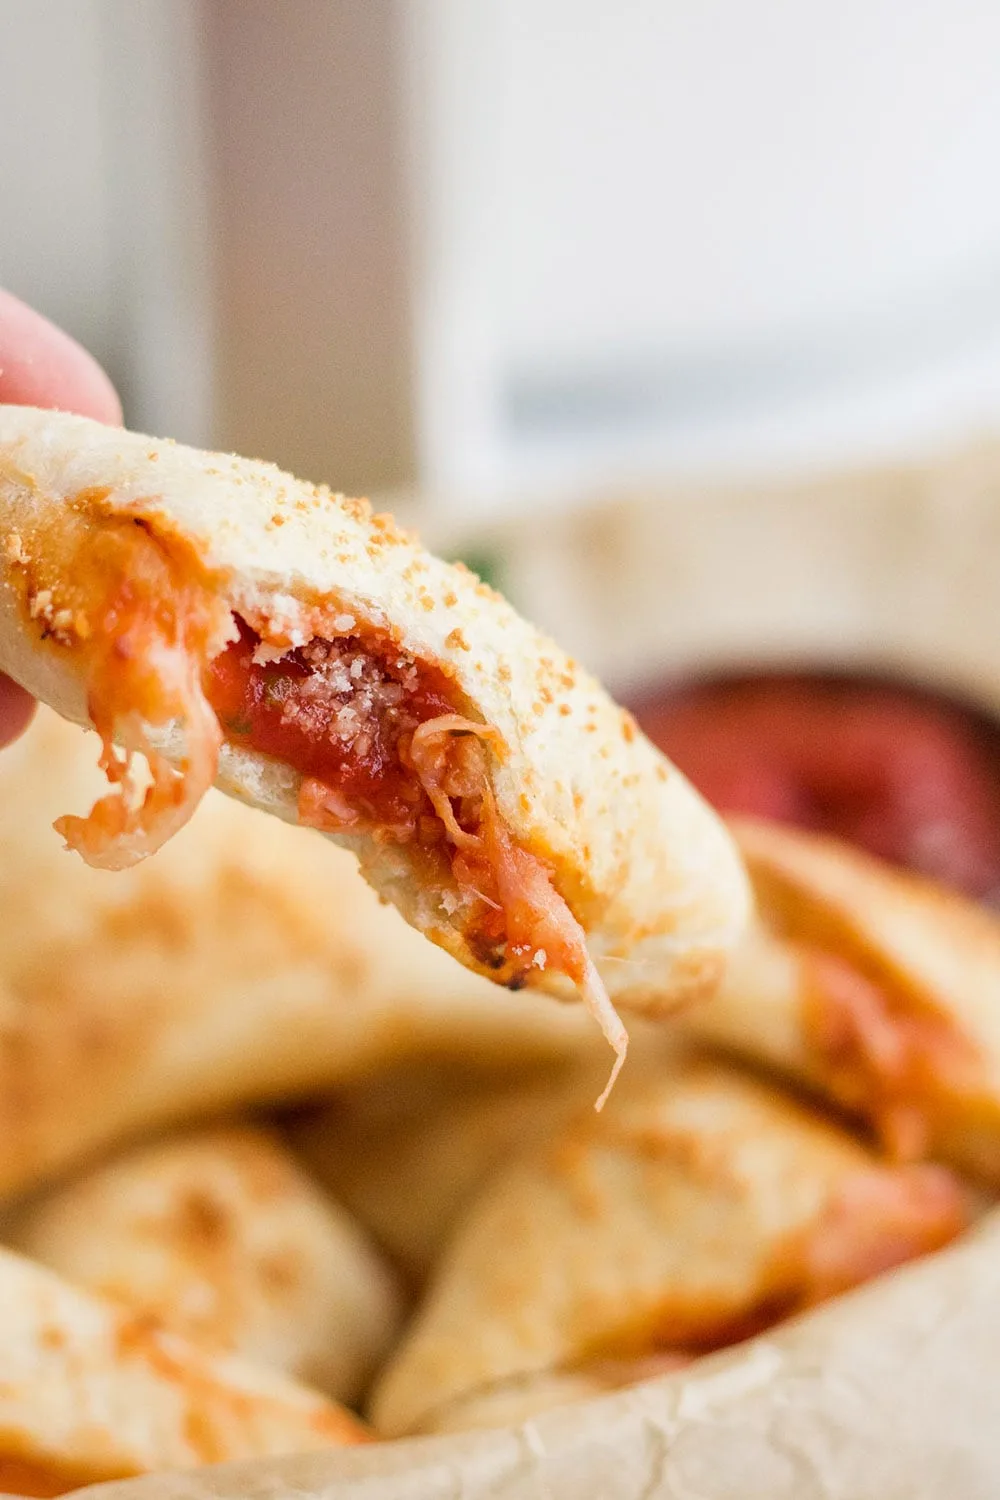 Bite out of a pizza roll showing sauce and cheese.